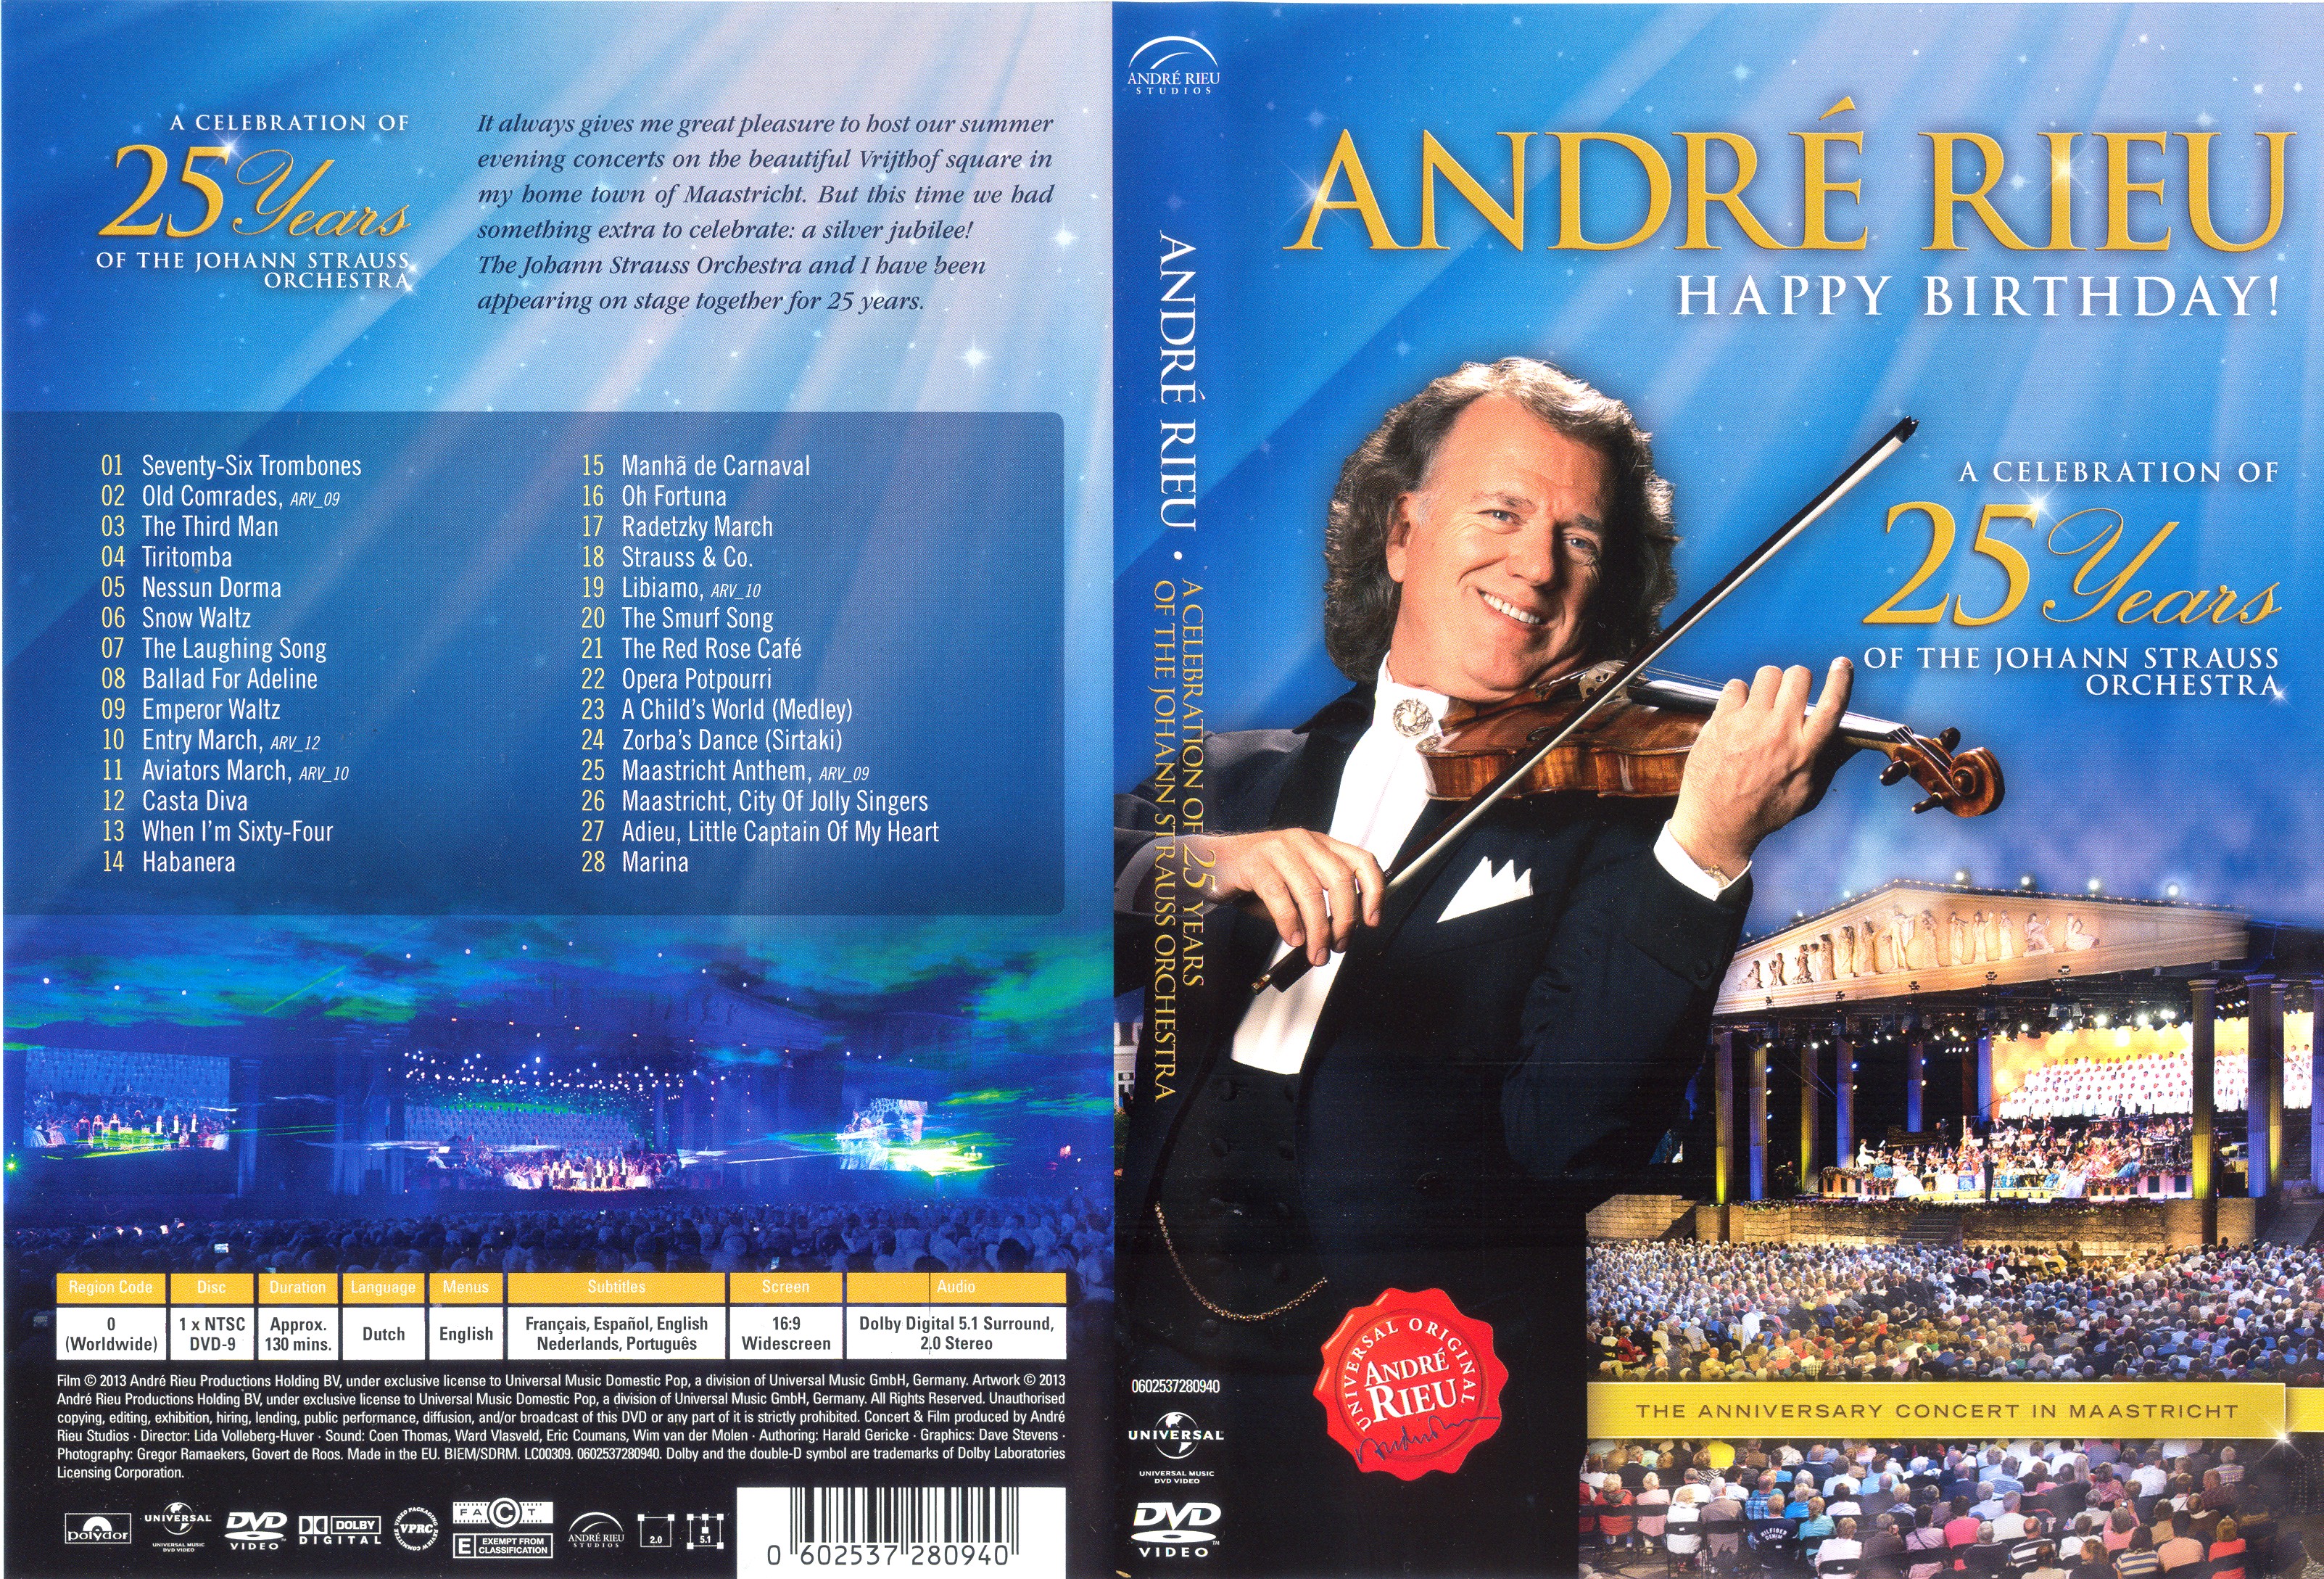 Jaquette DVD Andr Rieu Happy Birthday 25 ans